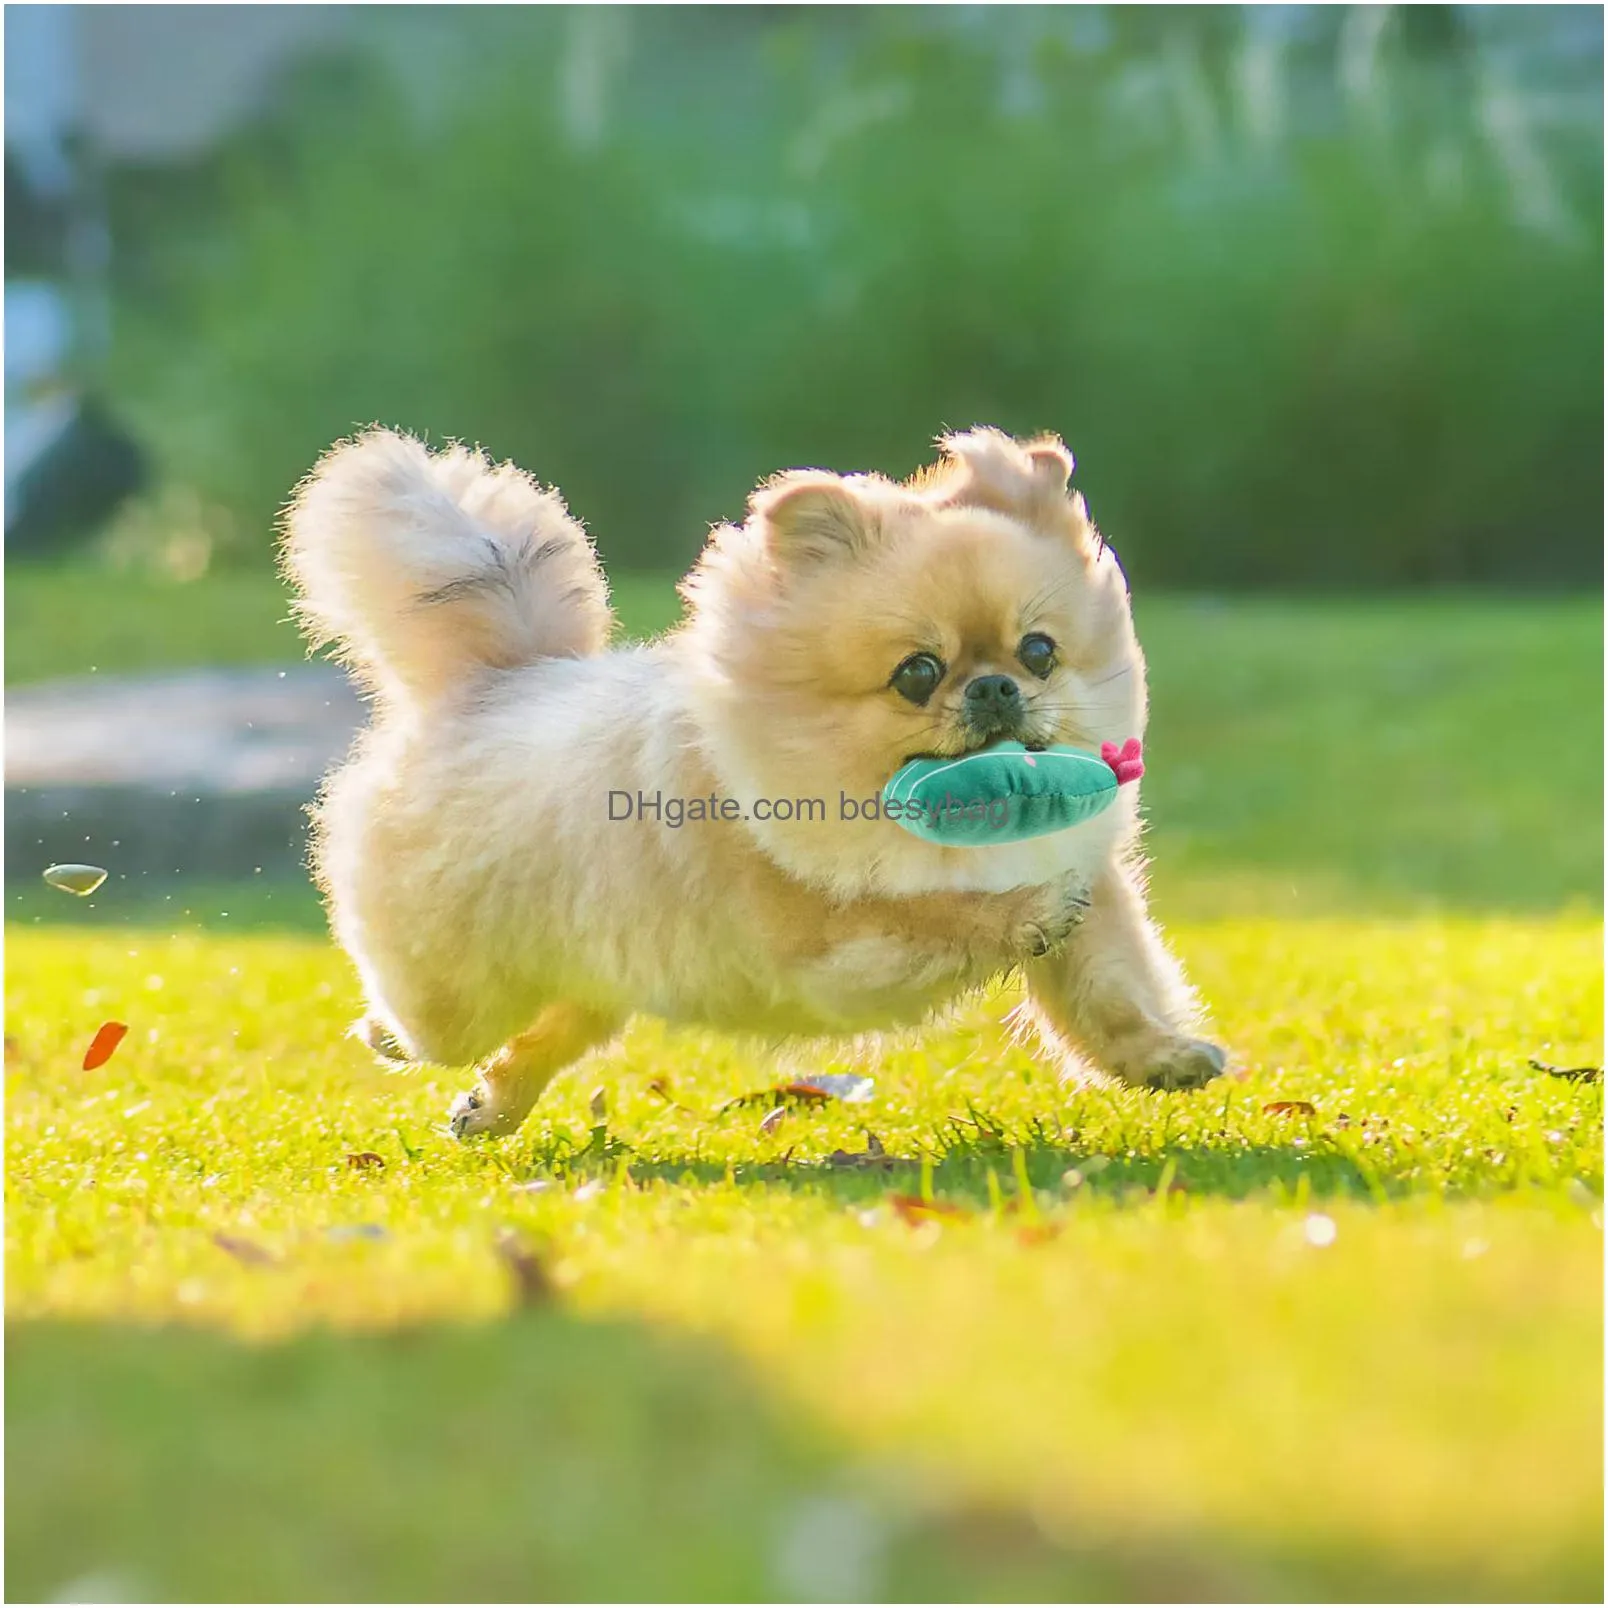 small dog toys durable puppy toys for teething small dogs cute dog toys small dogs plush squeaky dog toys reliable ropes puppy chew toys